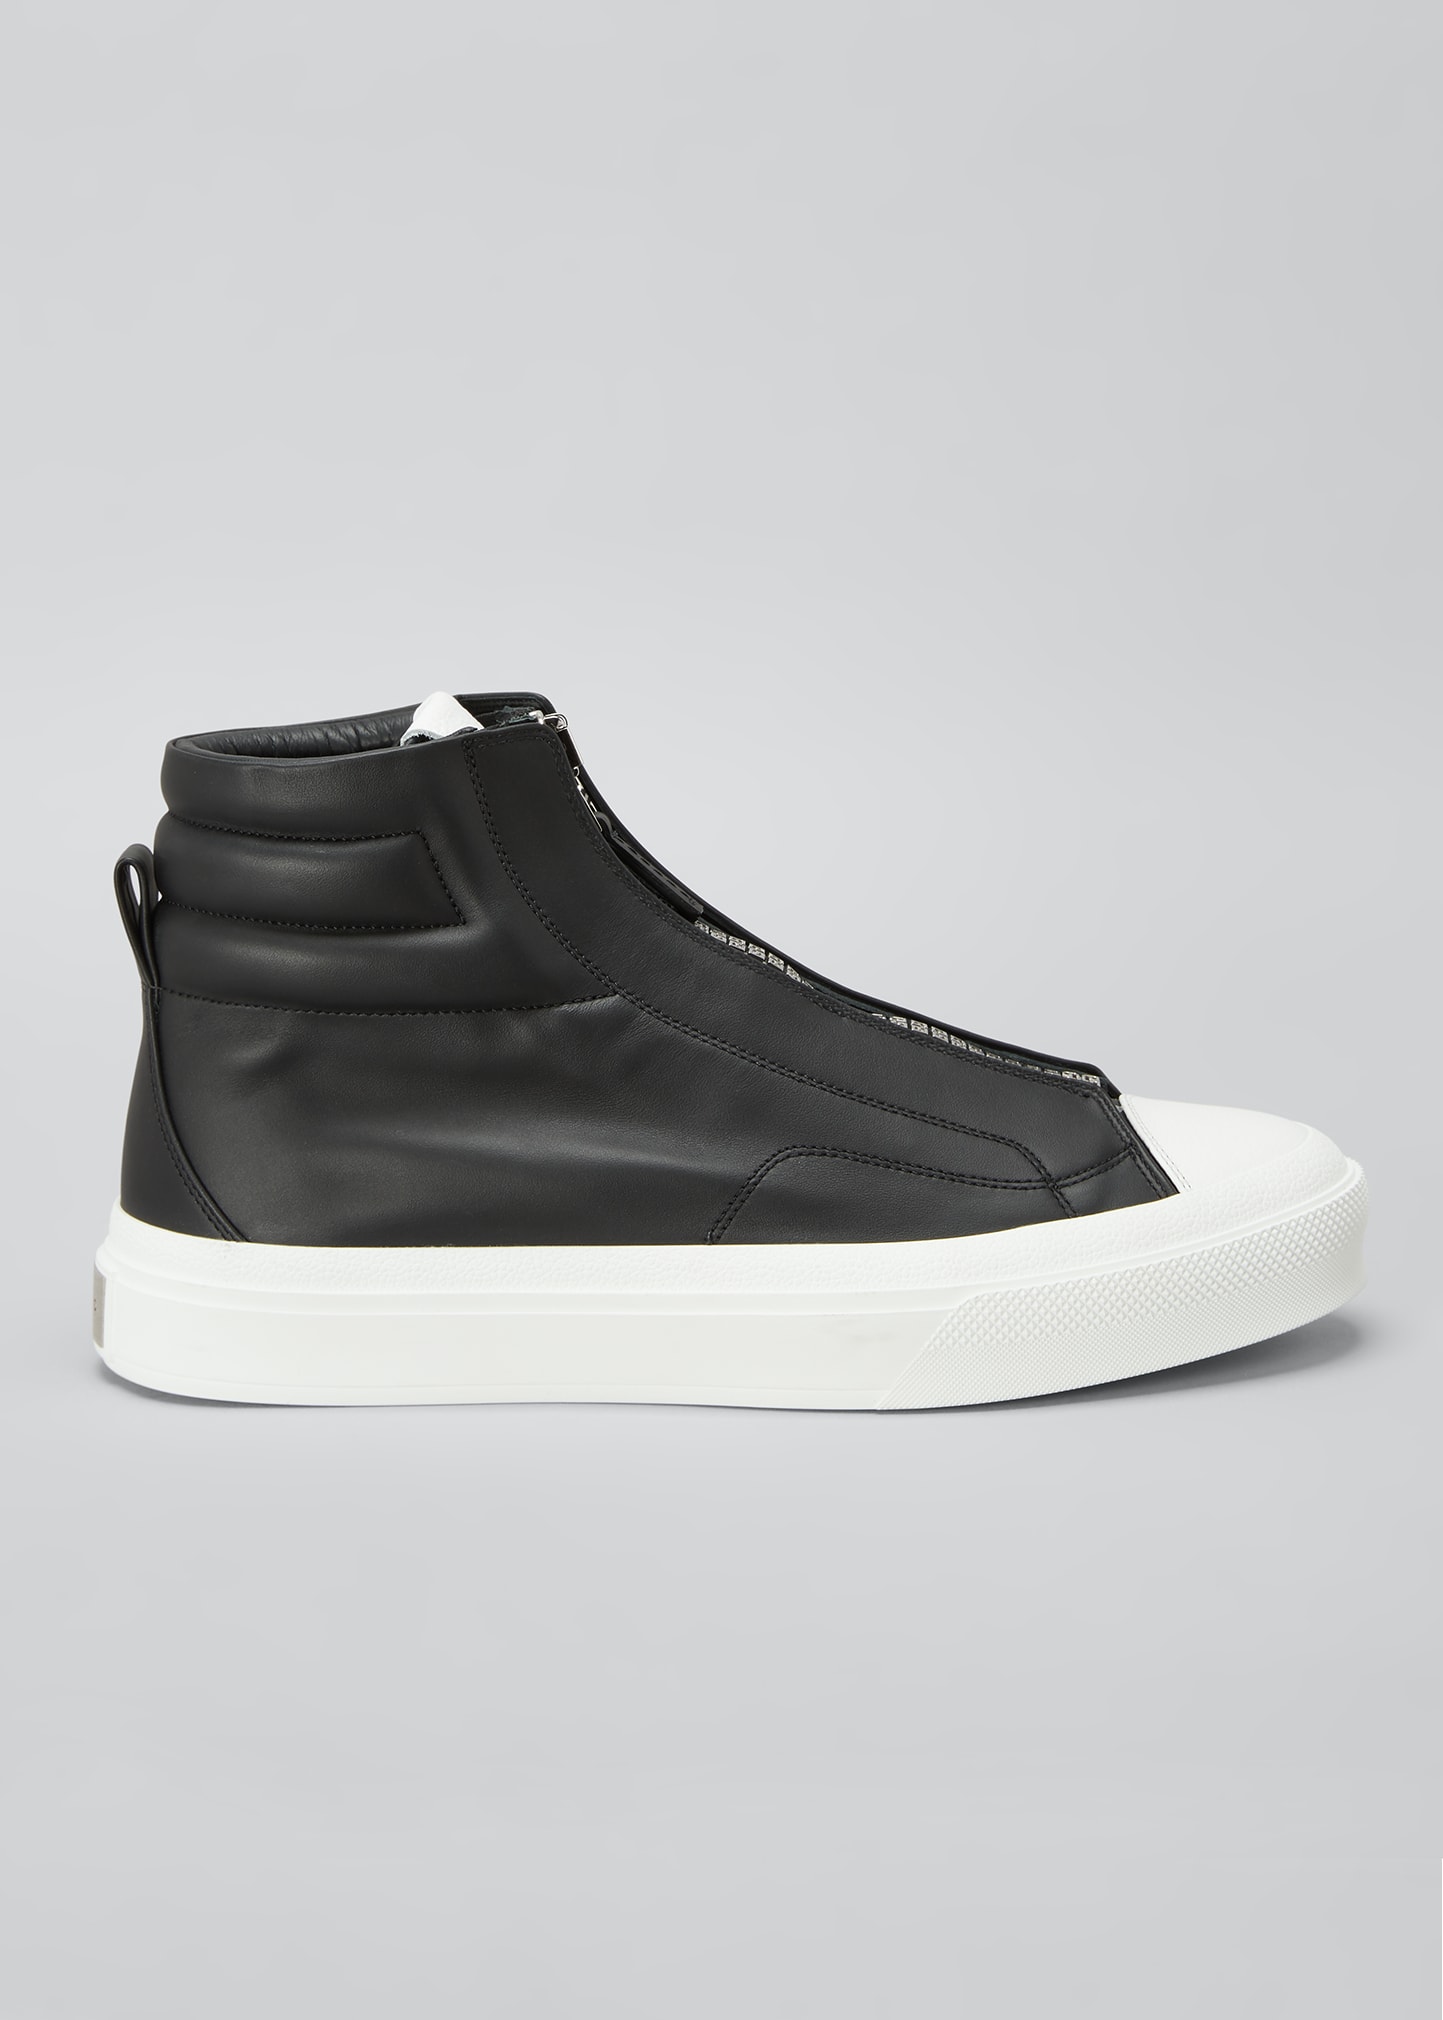 Givenchy Men's City 4G-Zip Leather High Top Sneakers